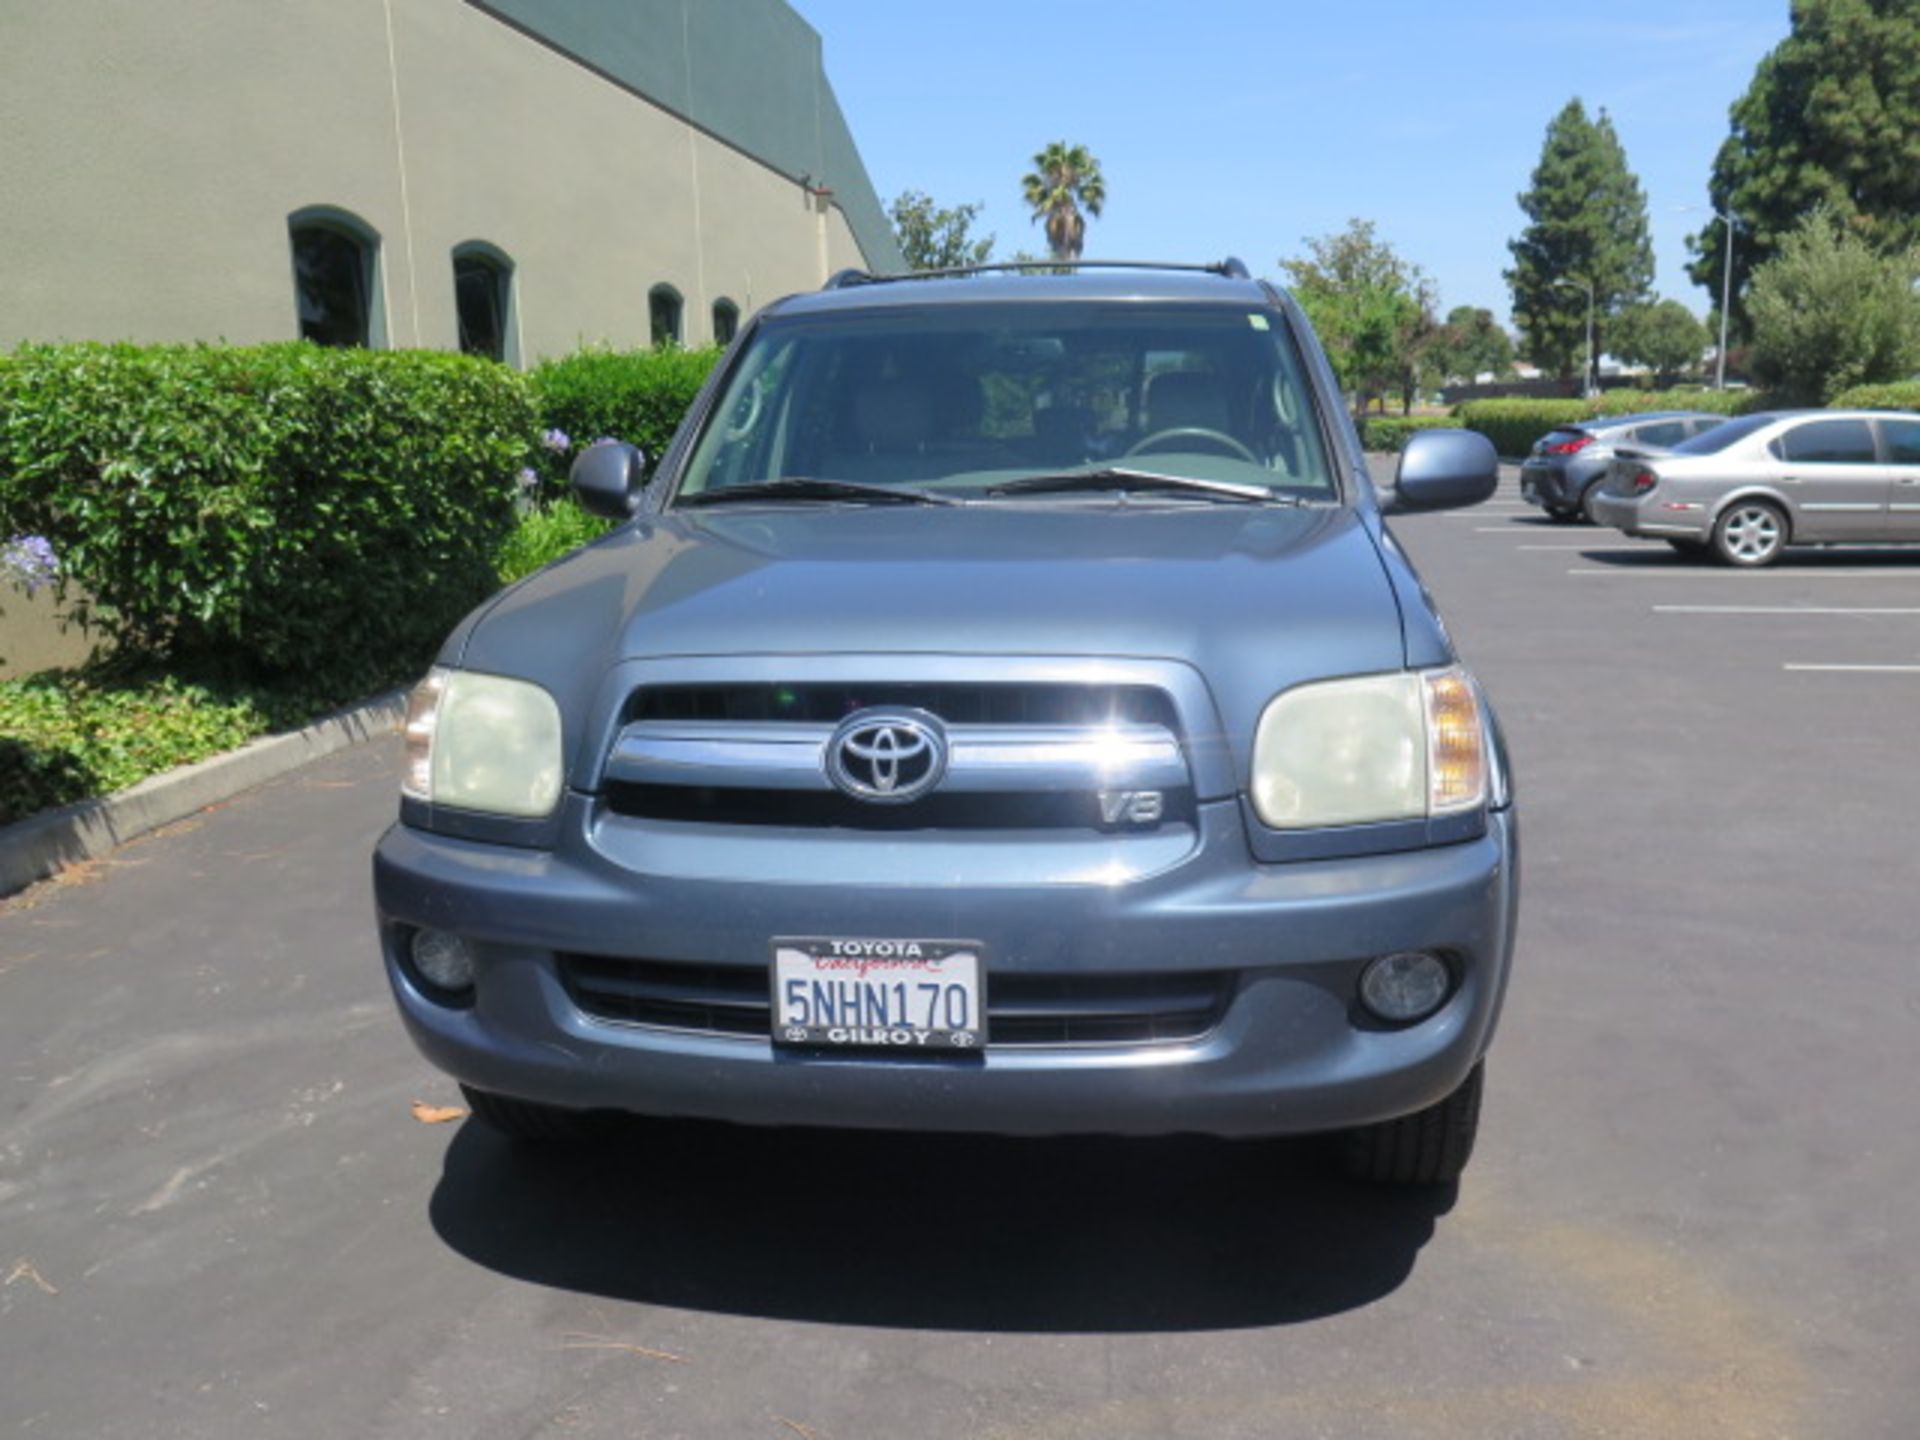 2005 Toyota Sequoia Limited SUV Lisc# 5NHN170 w/ 4.7L i-Force V8 Gas Engine, Automatic Trans, AC, - Image 2 of 14